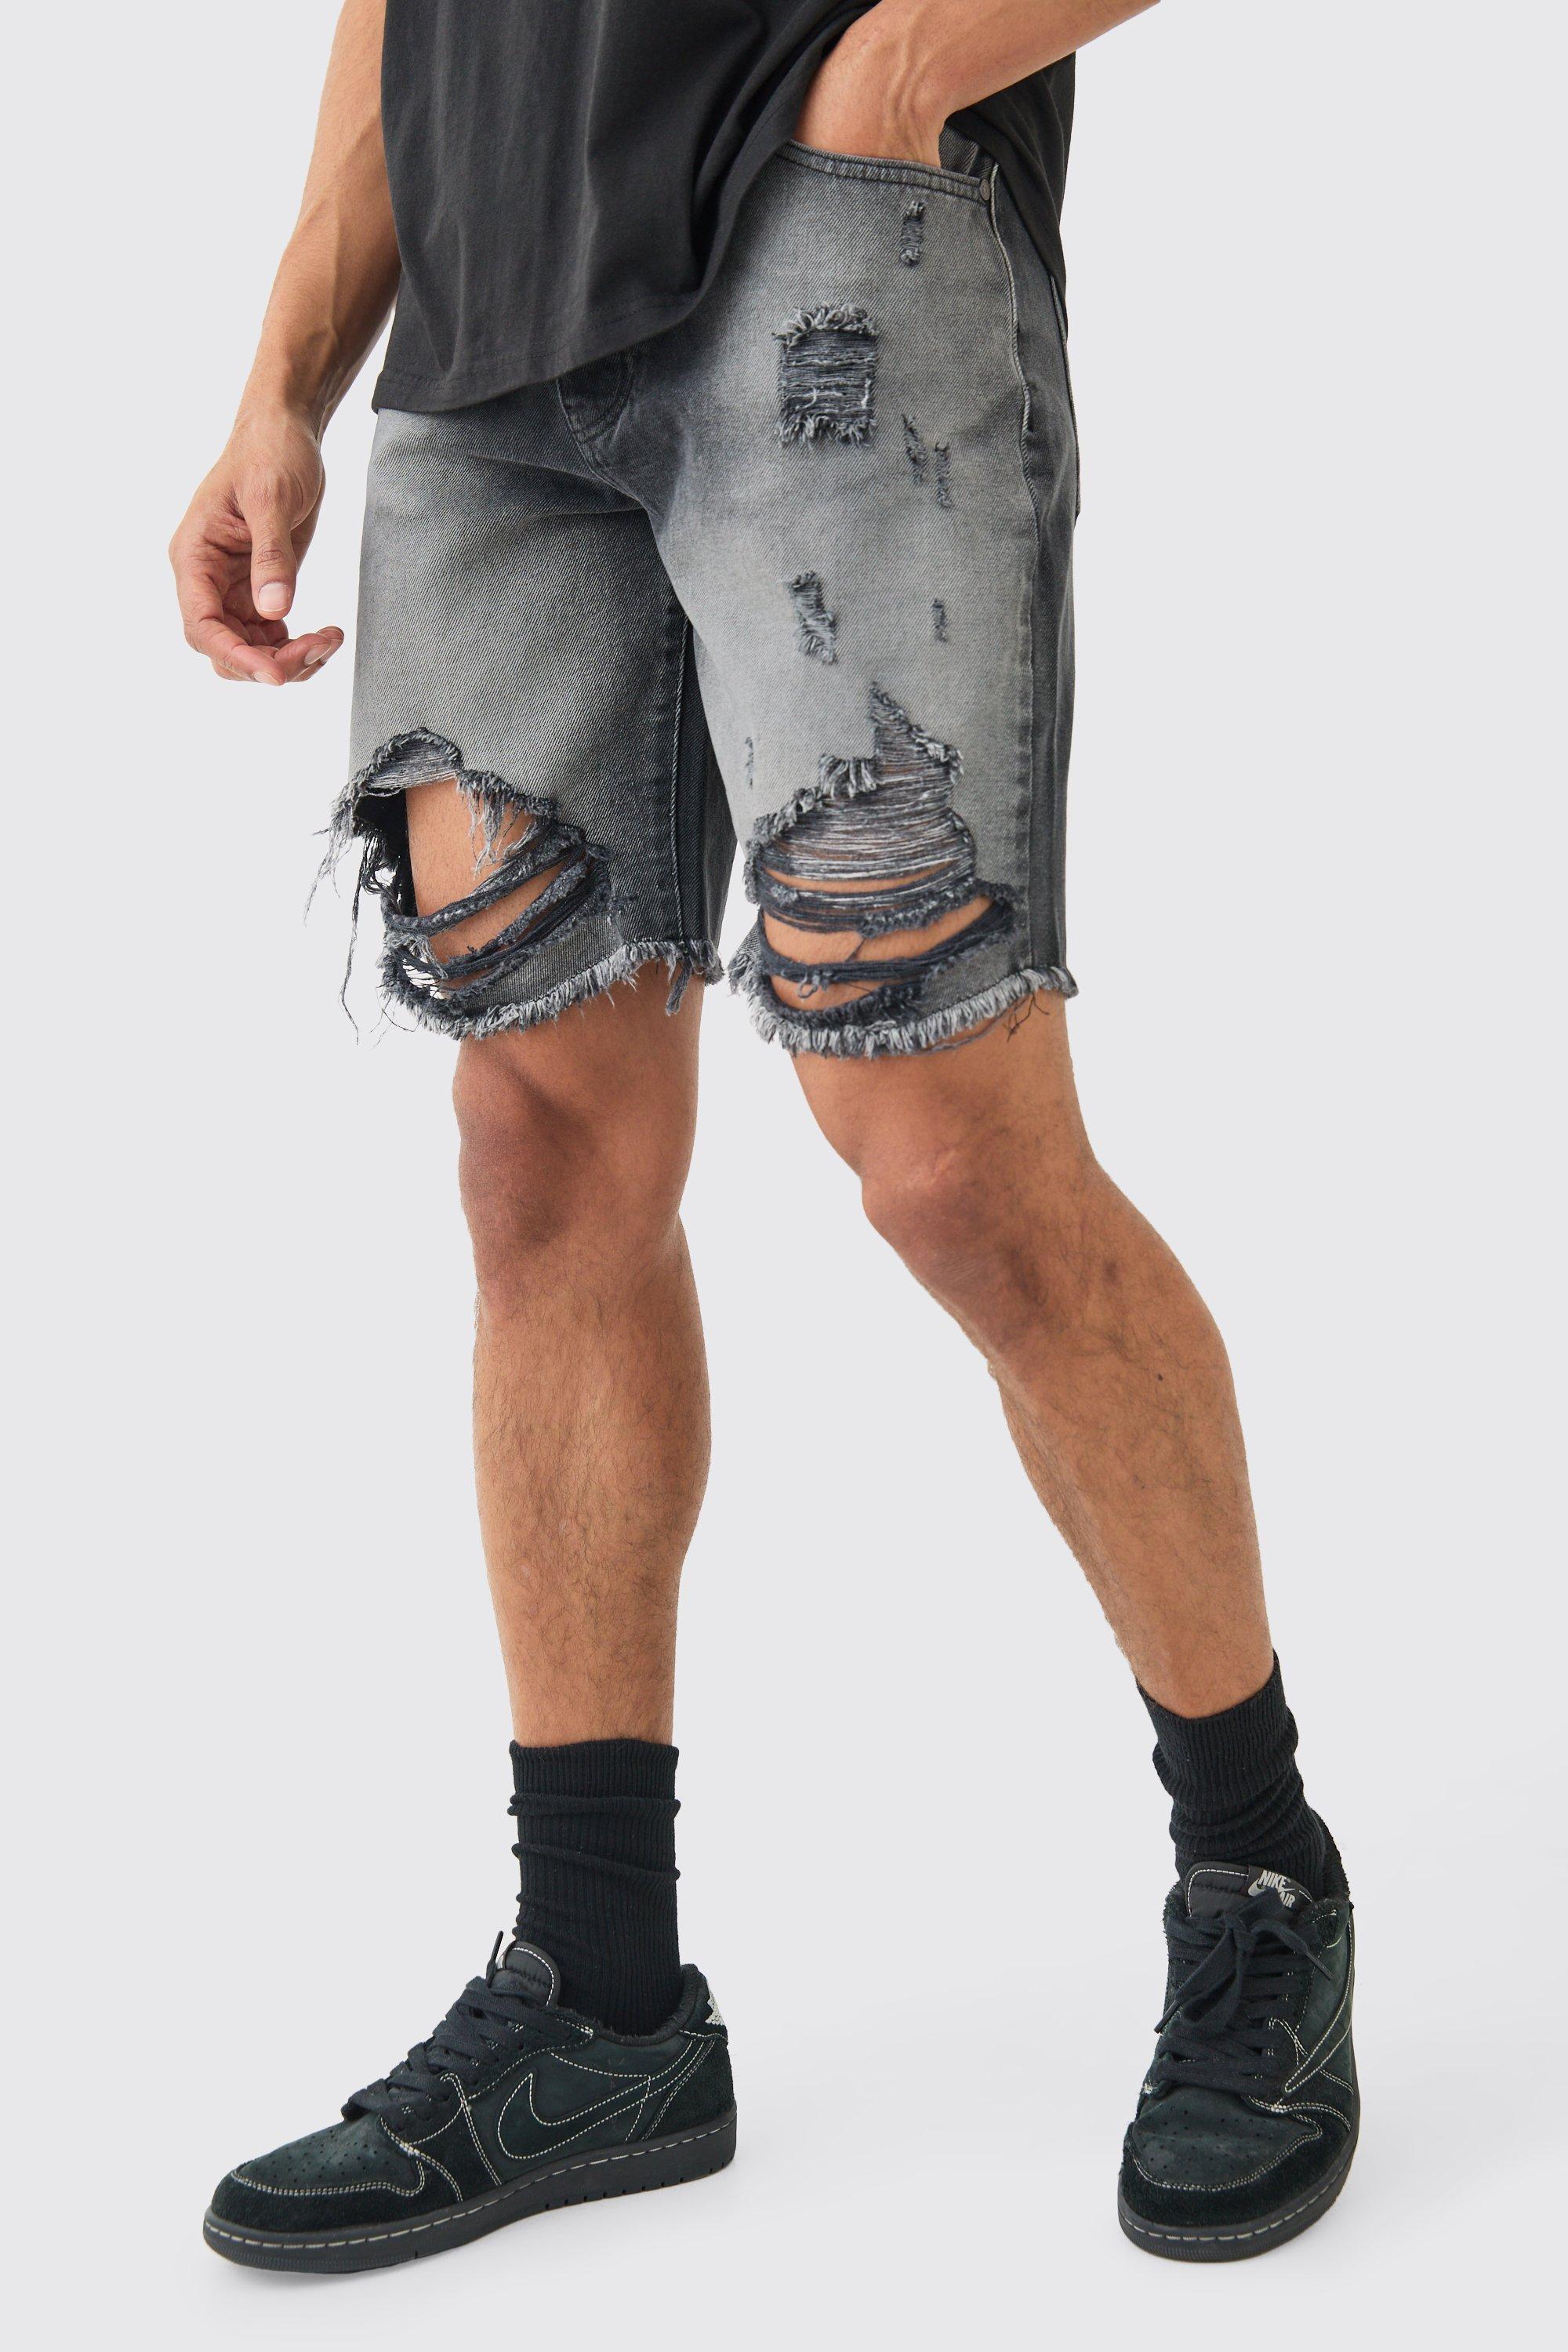 Image of Relaxed Rigid Long Length Ripped Denim Shorts In Washed Black, Nero